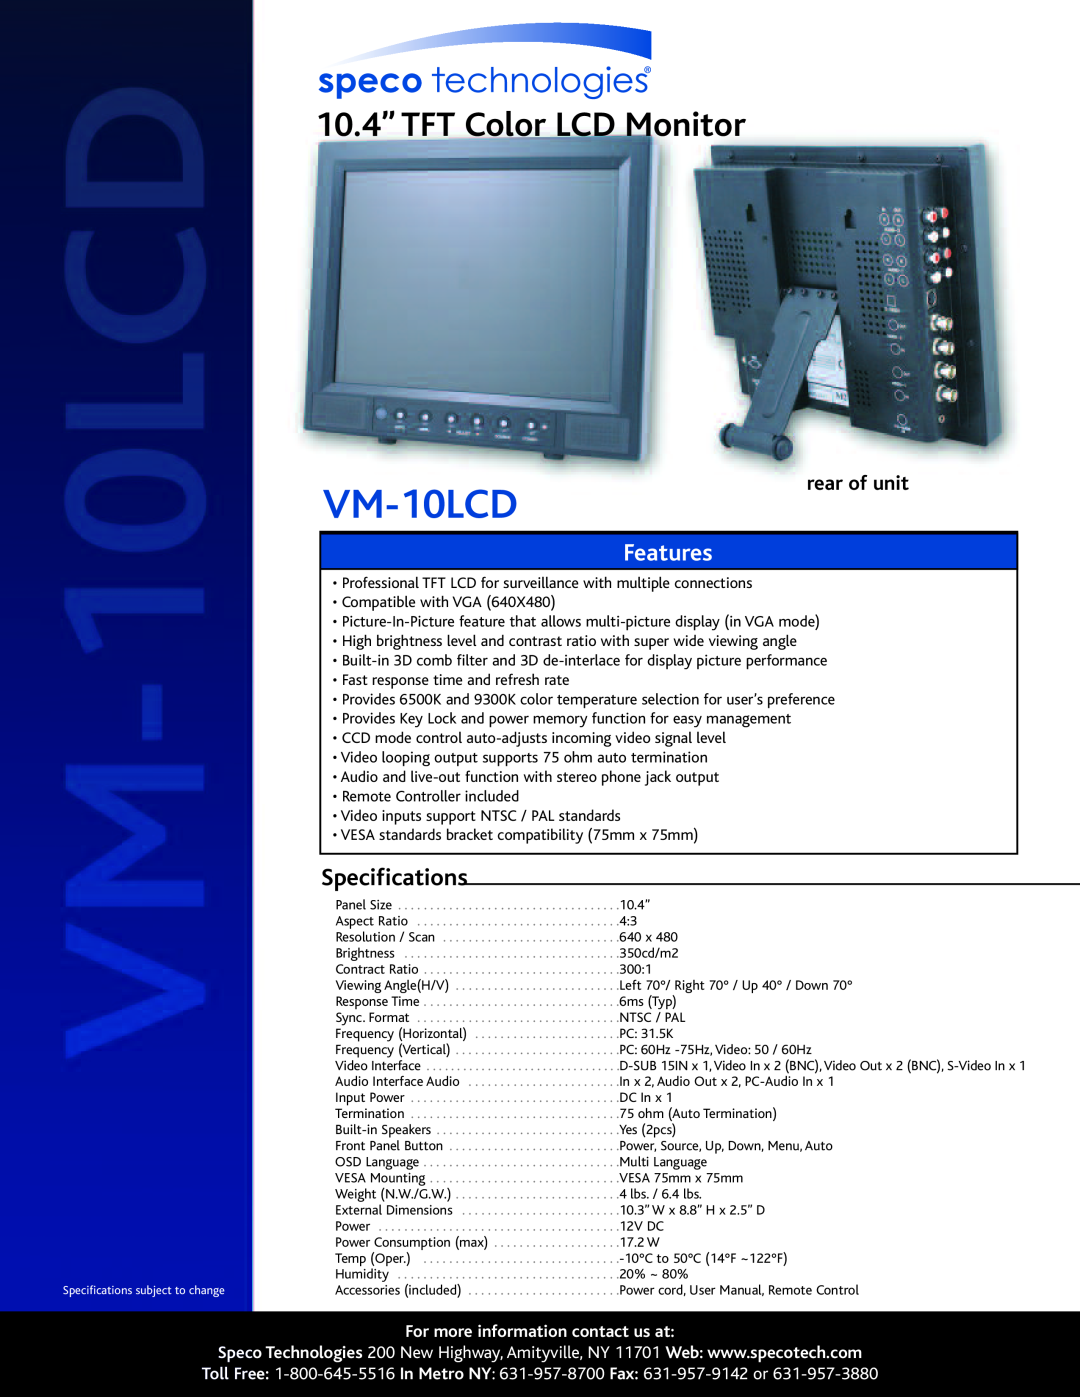 Speco Technologies VM-10LCD specifications 10.4” TFT Color LCD Monitor, Features, Specifications, rear of unit 